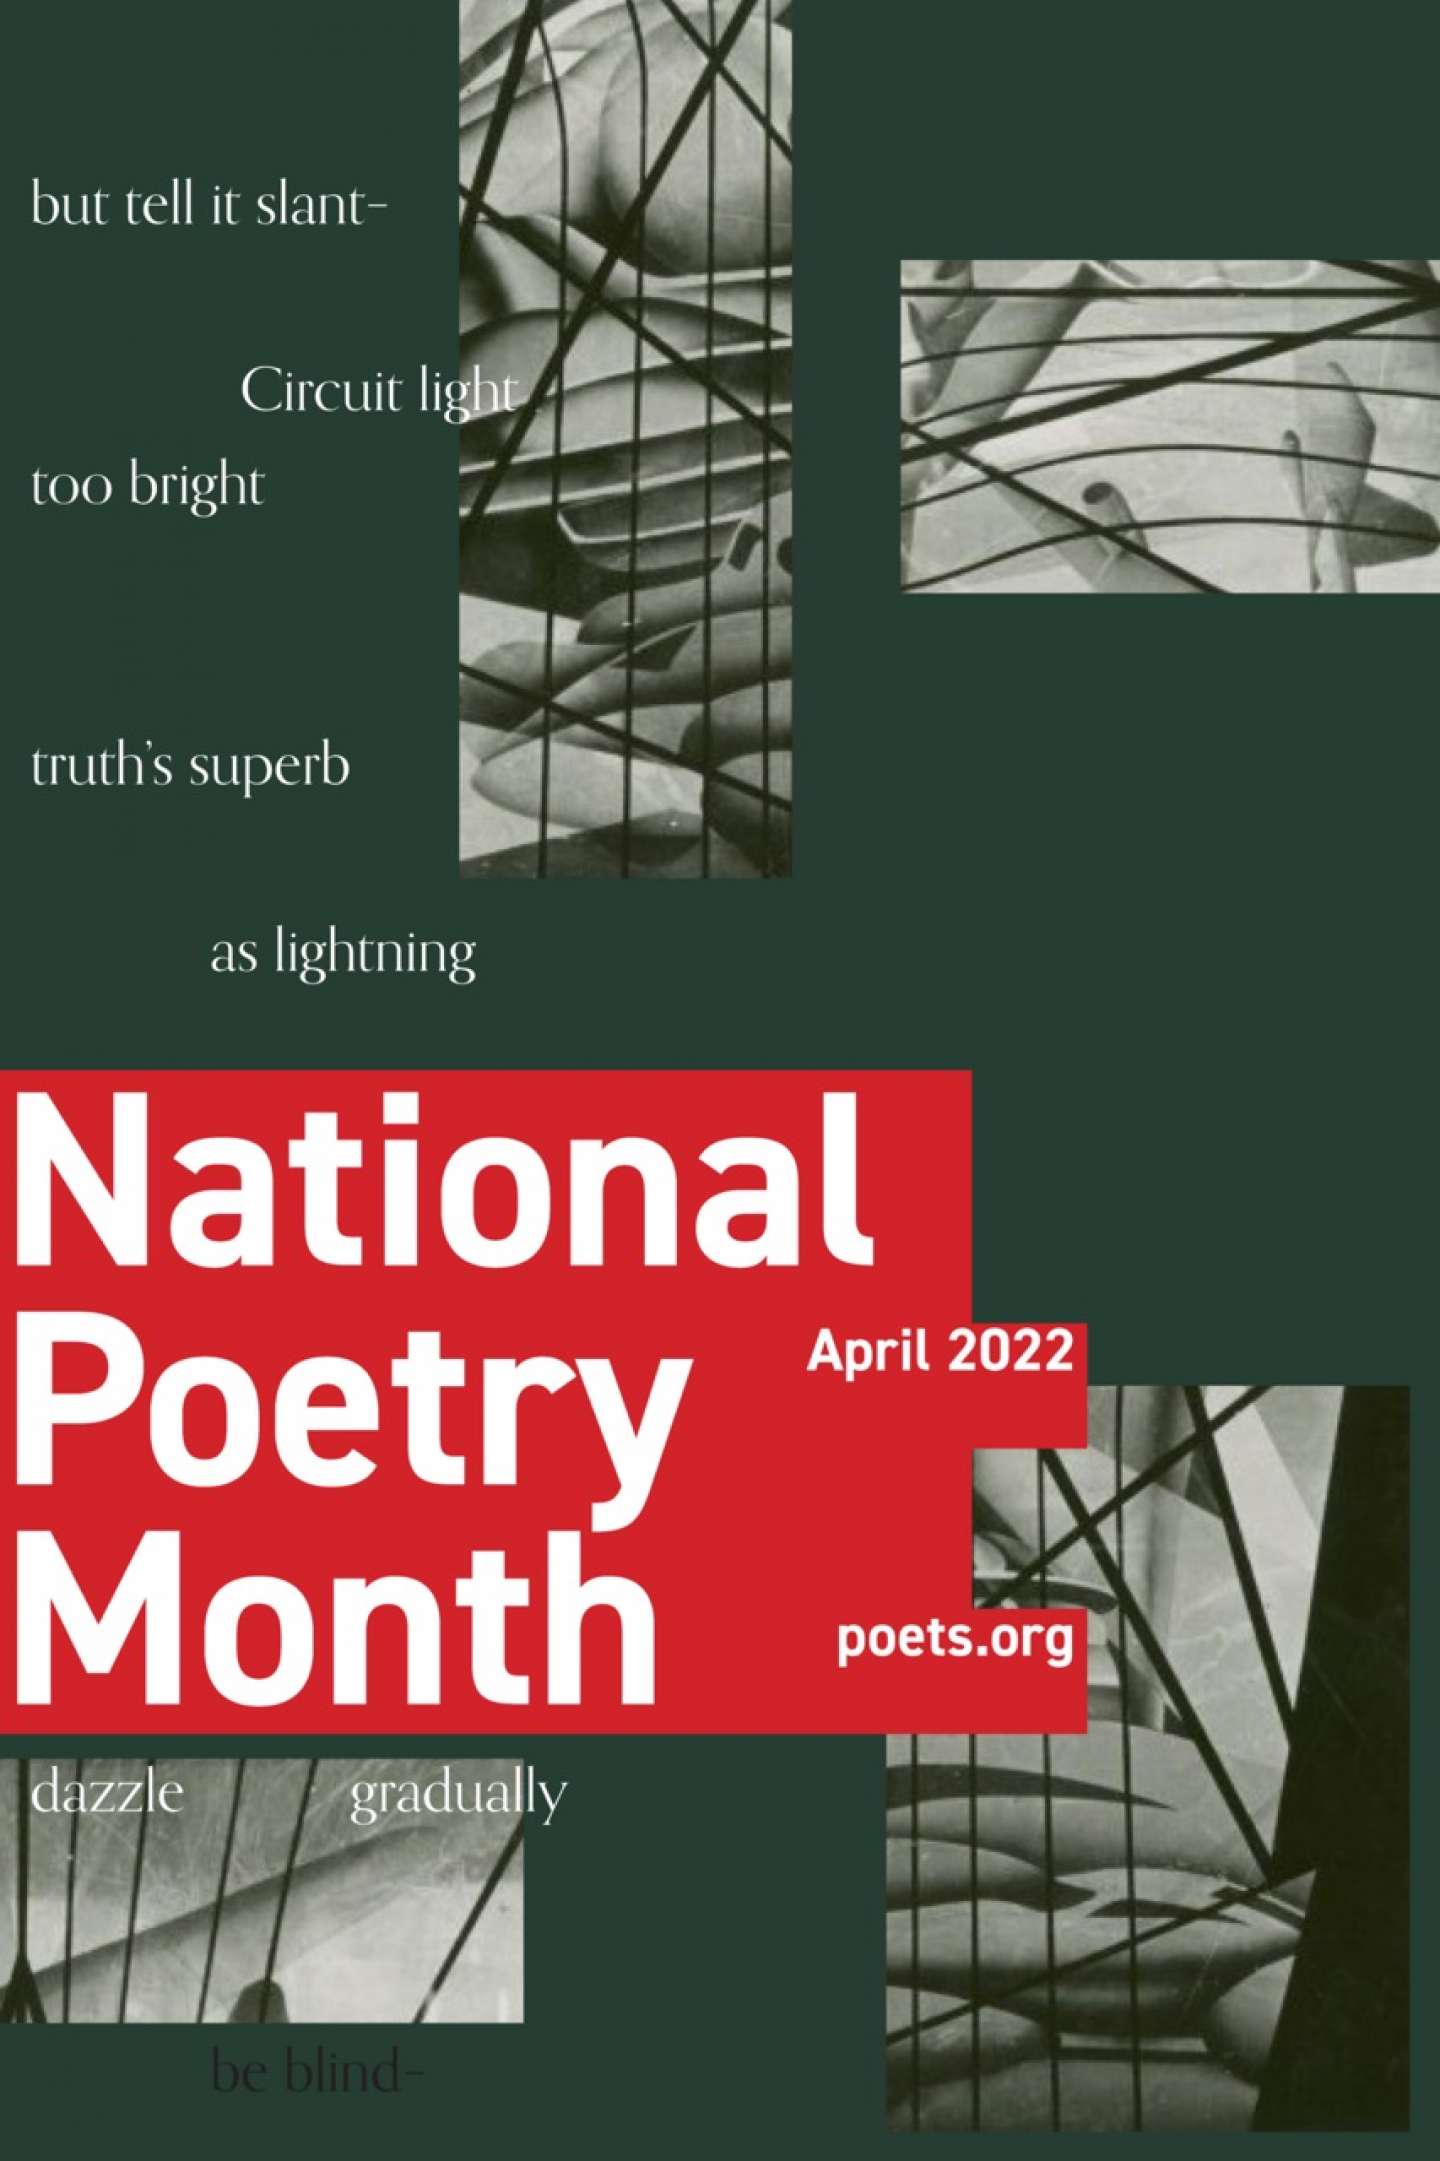 National Poetry Month Poster by Yi Zhou SVA Design